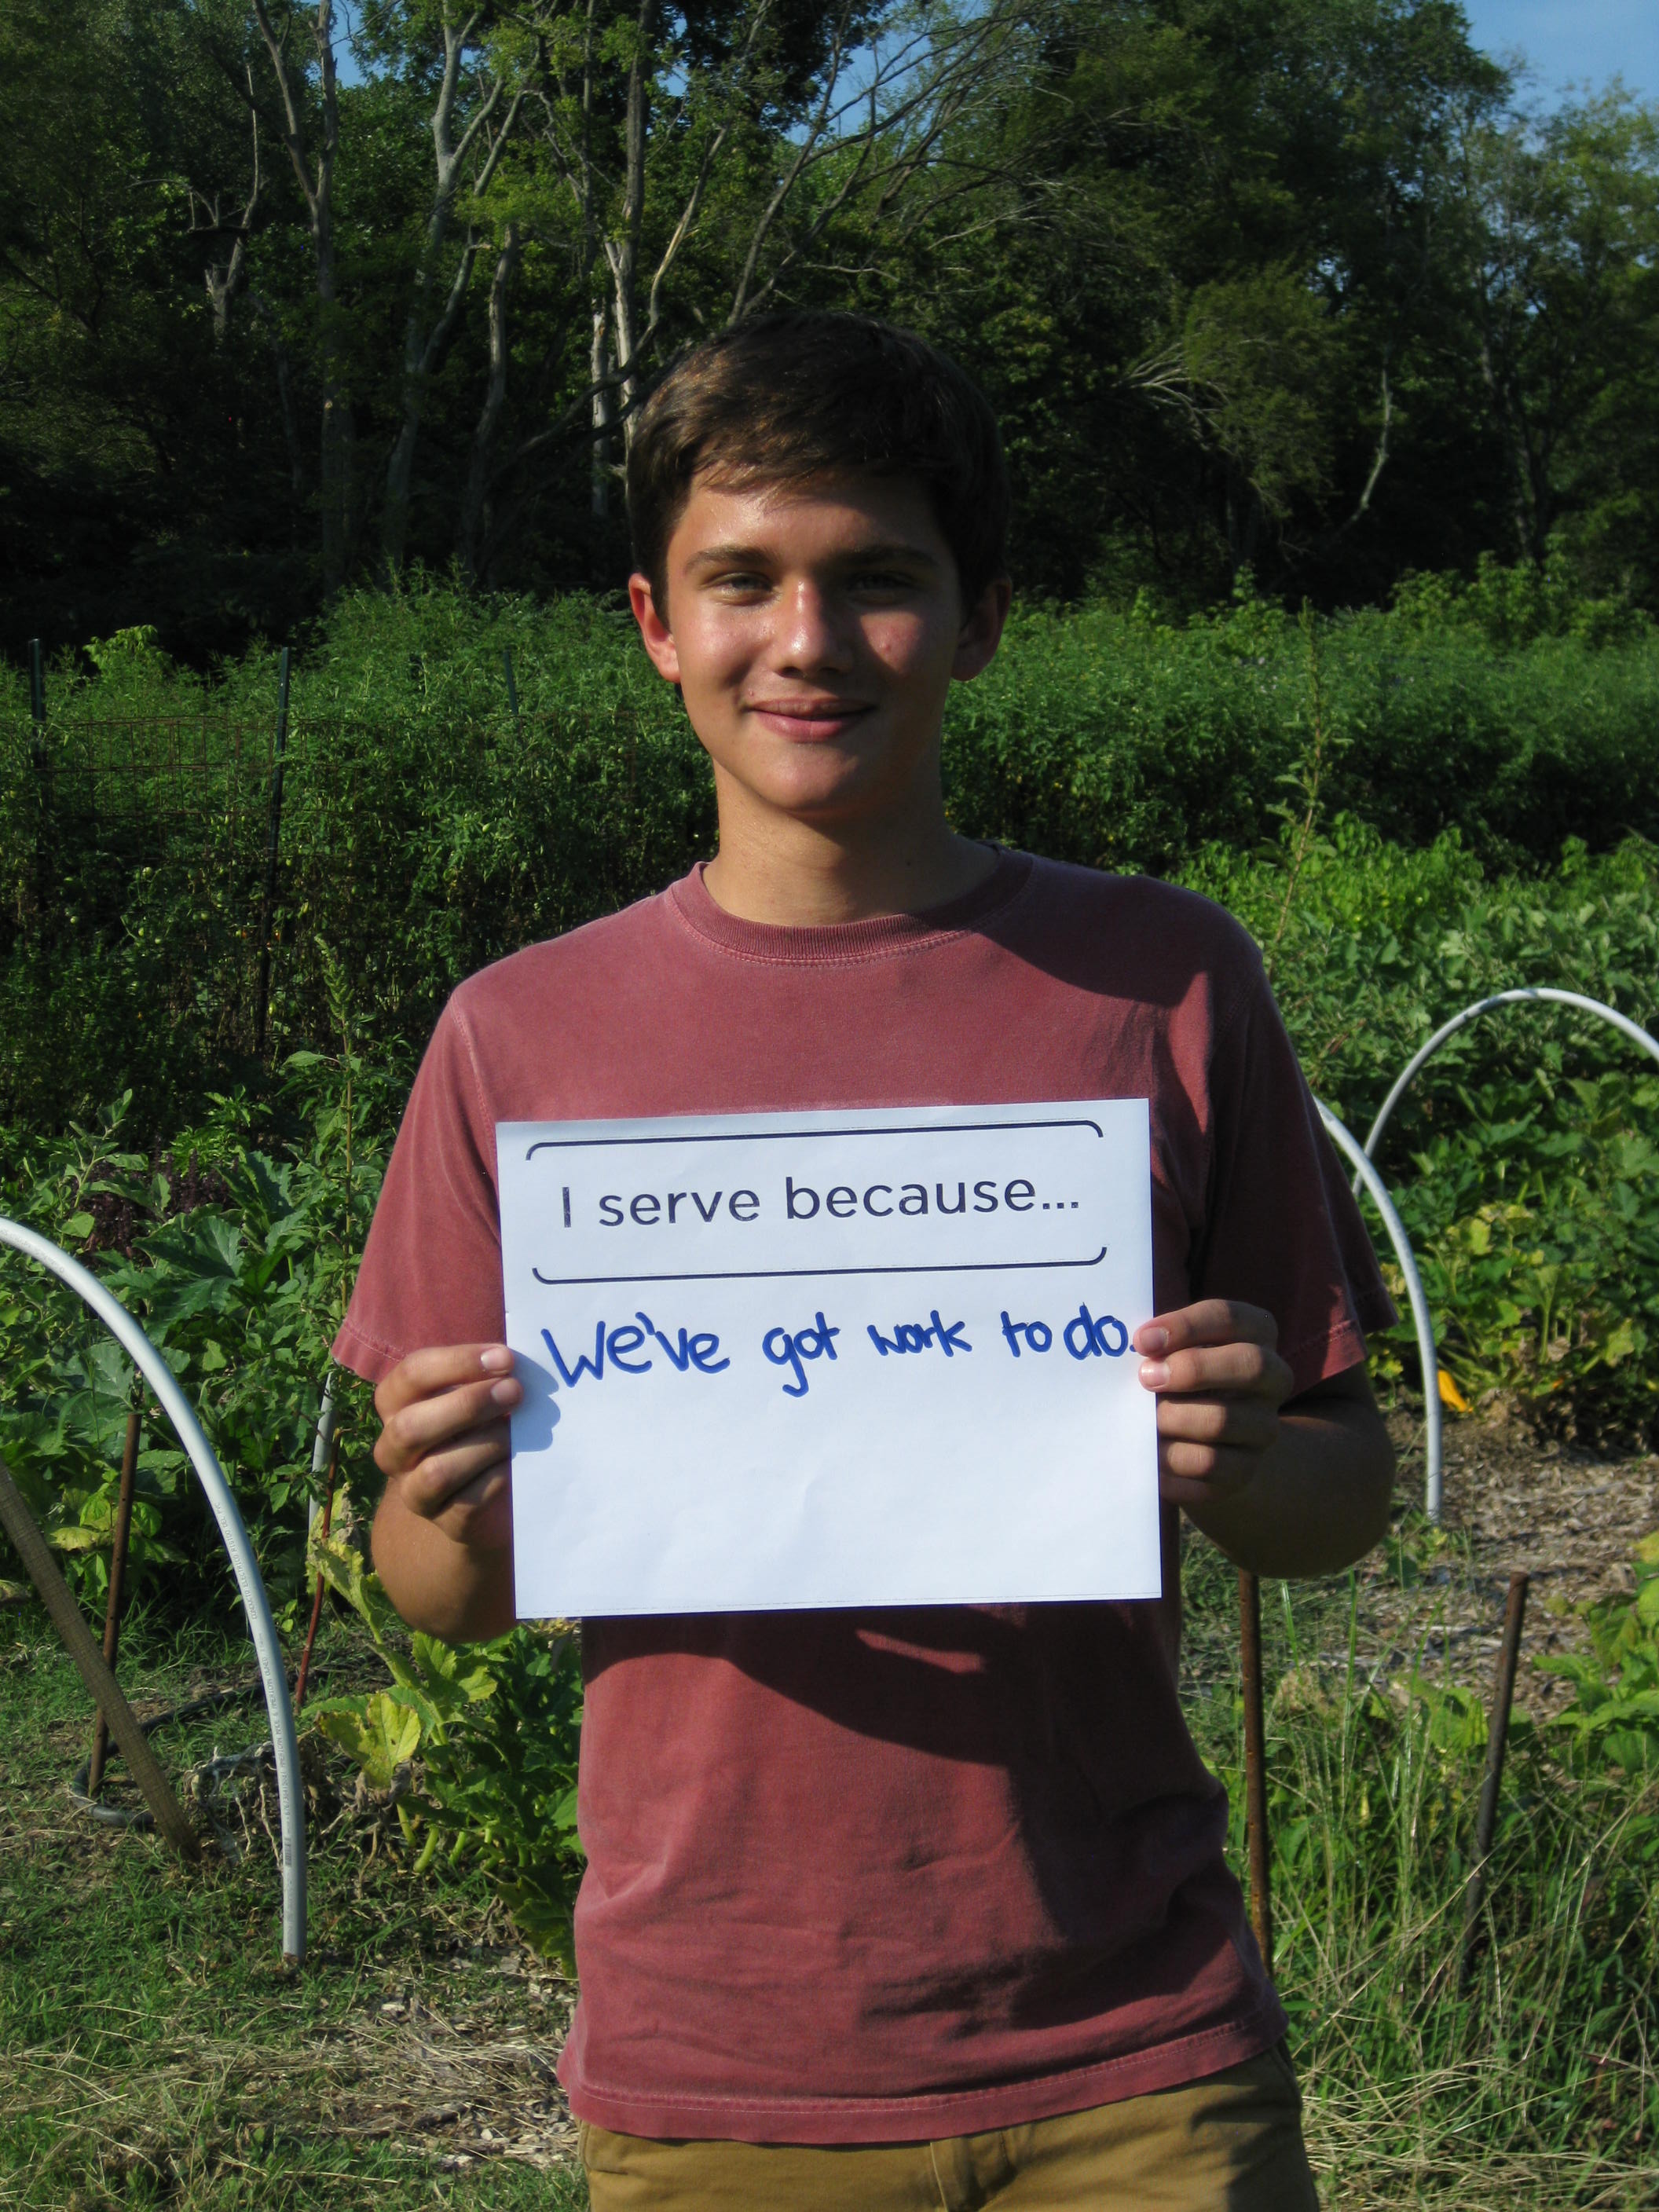 "I serve because we've got work to do." - Simon Cooper,, HON Urban Agriculture Intern